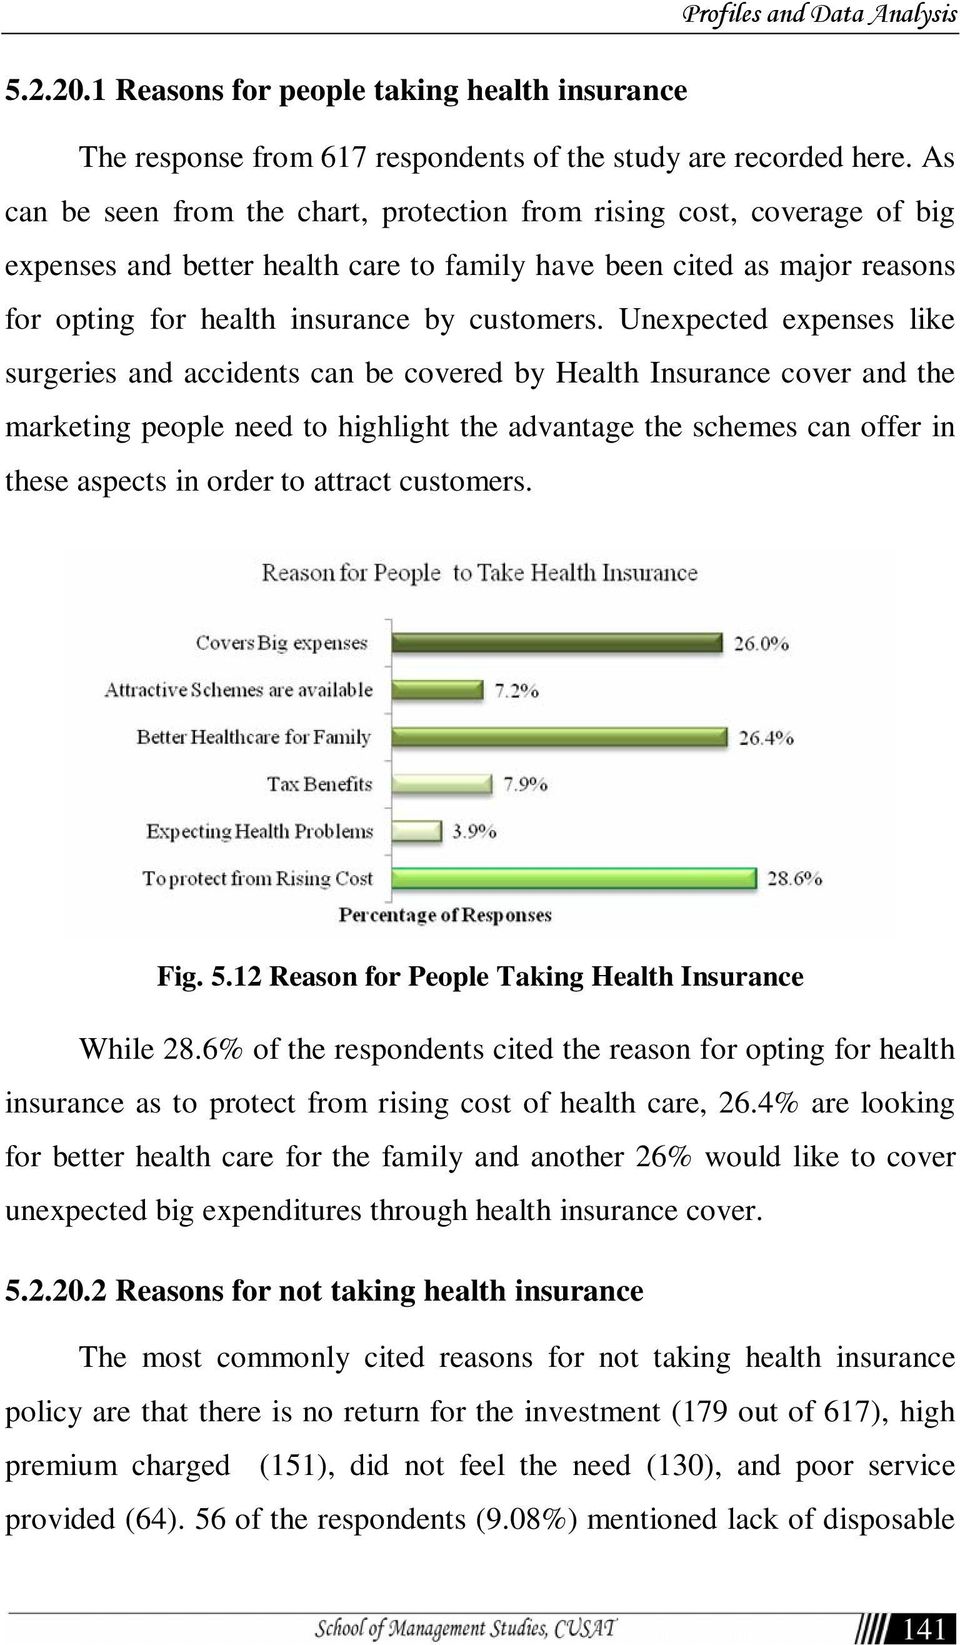 Unexpected expenses like surgeries and accidents can be covered by Health Insurance cover and the marketing people need to highlight the advantage the schemes can offer in these aspects in order to